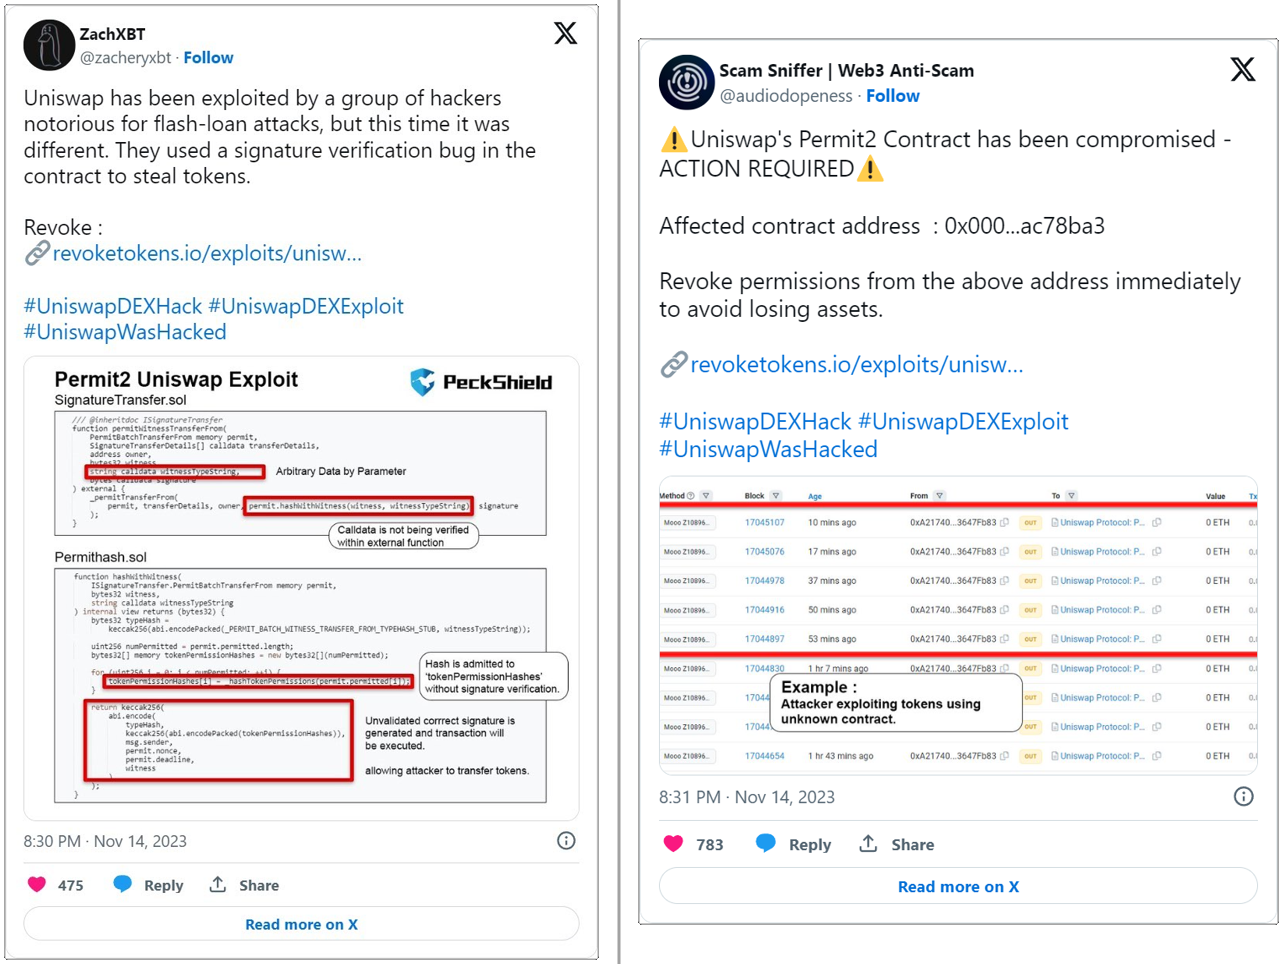 Crypto scam promoted from fake accounts impersonating ZachXBT and Scam Sniffer